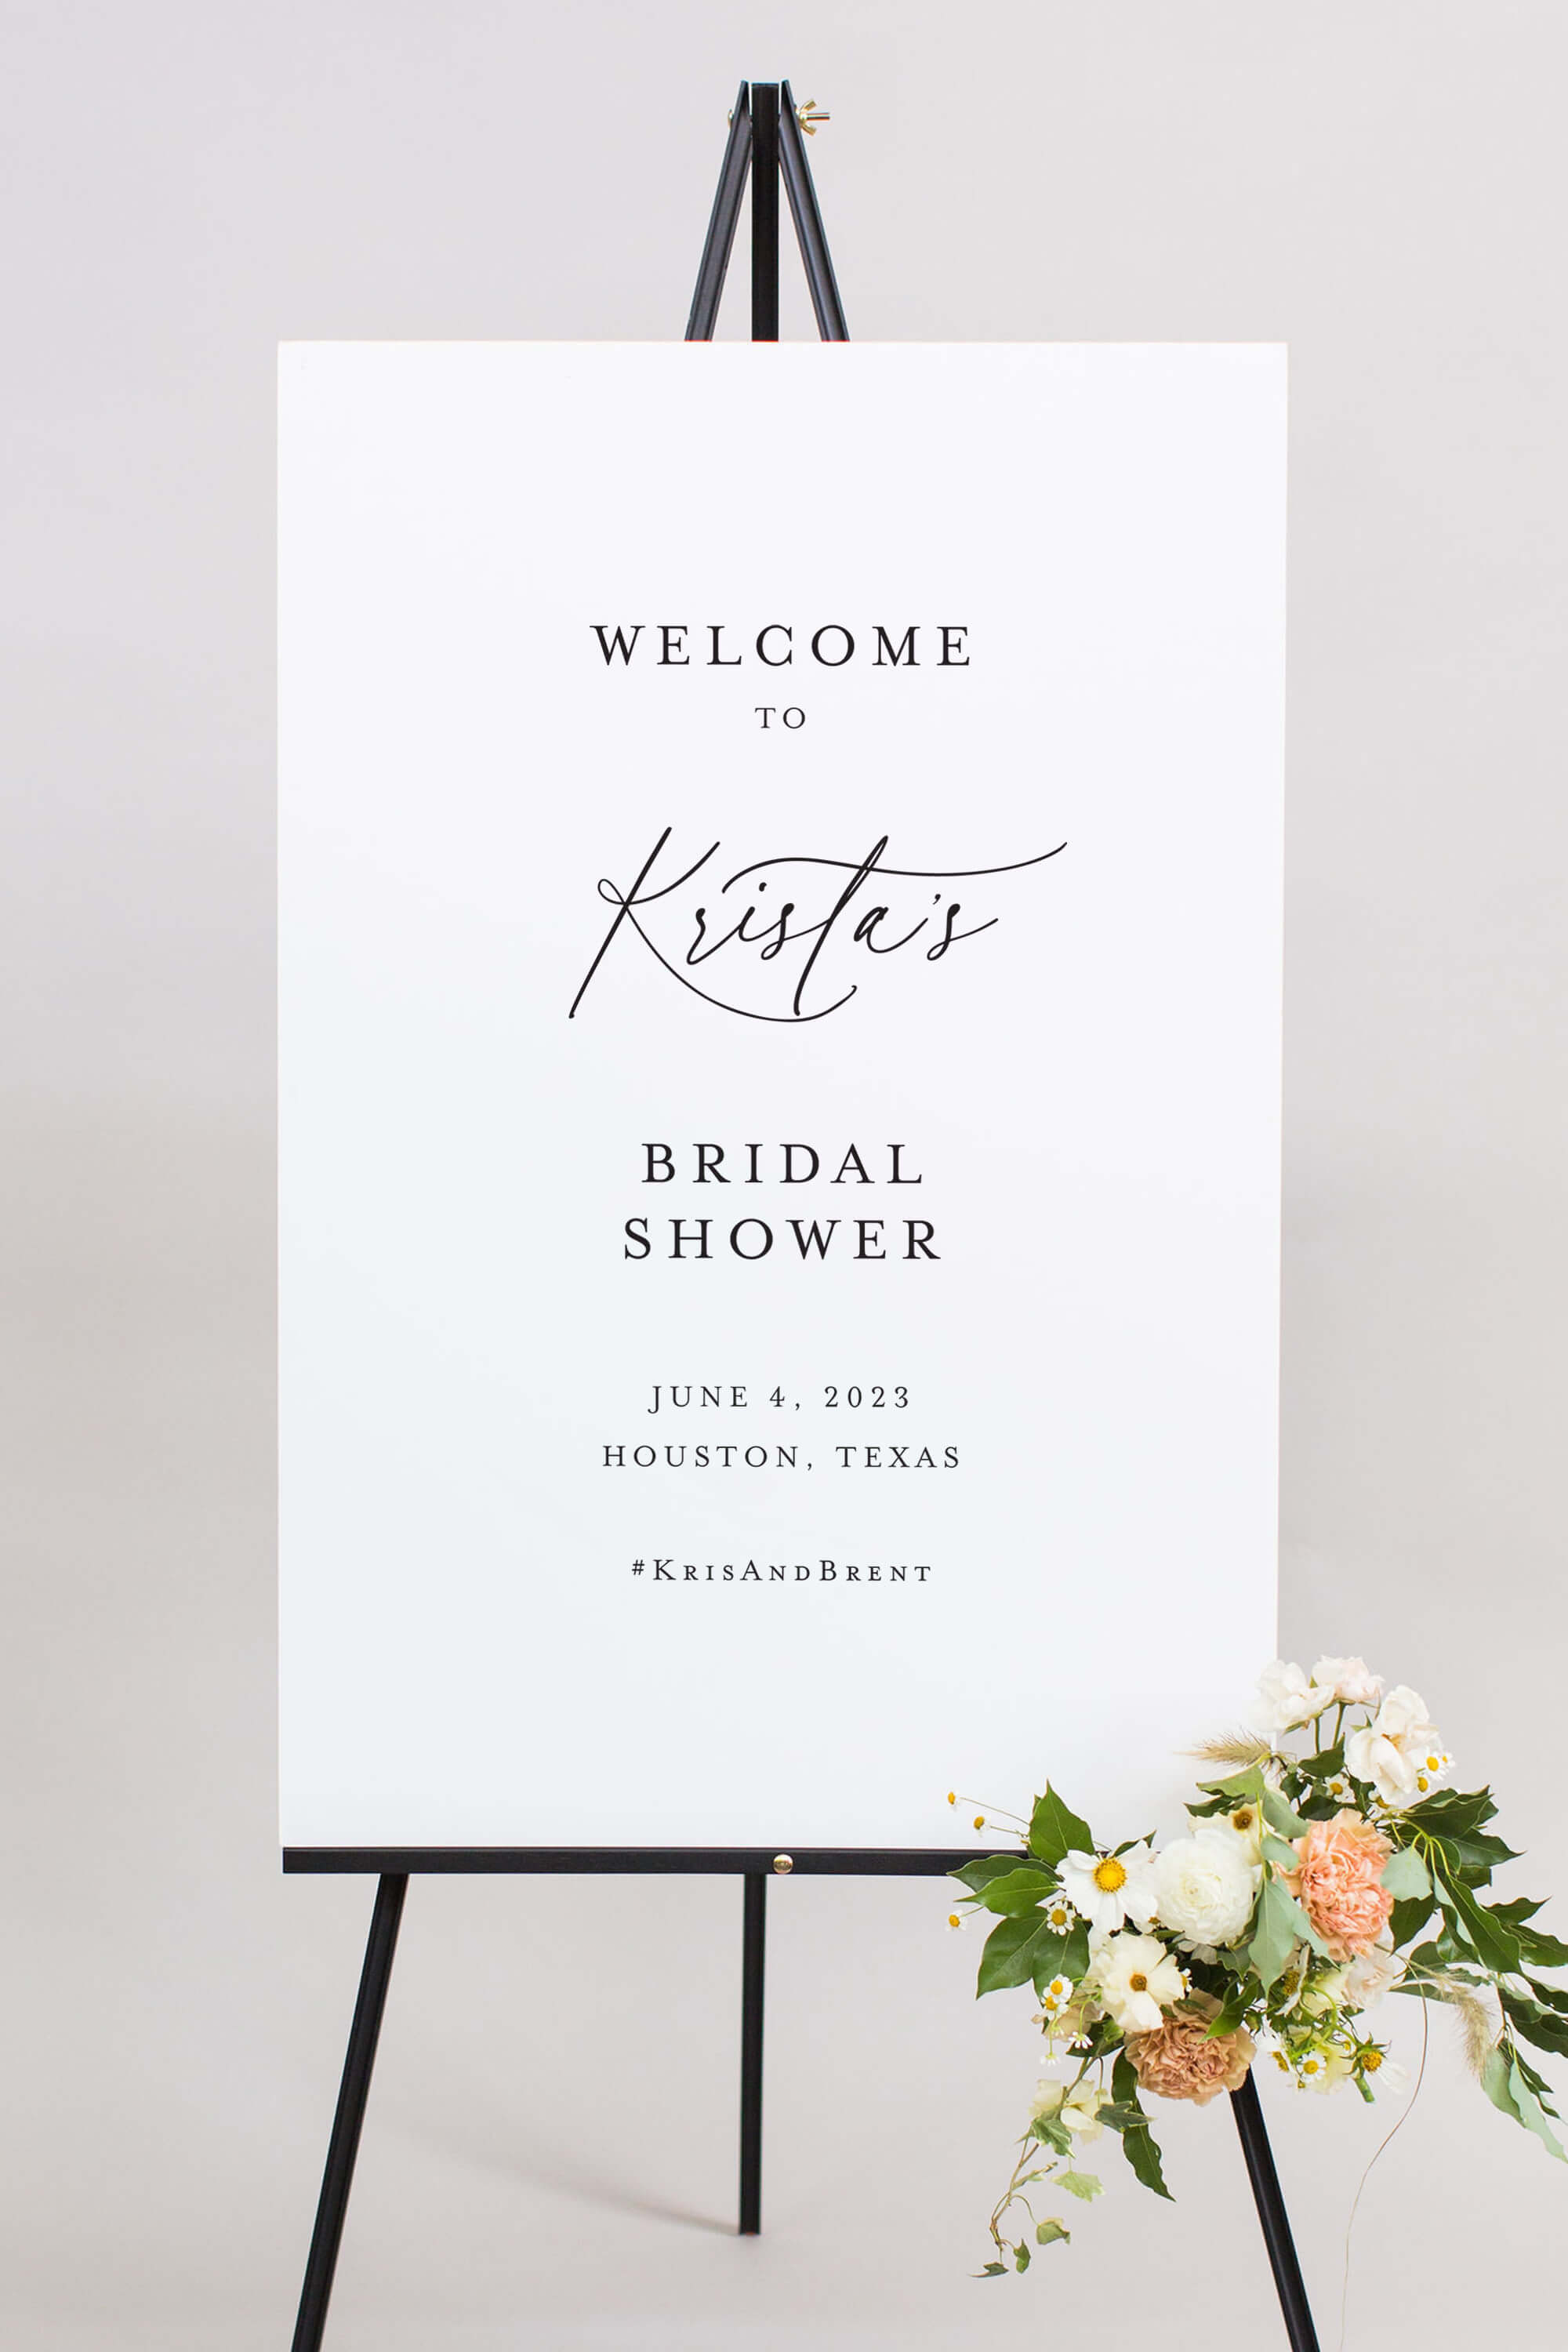 Wedding Shower Welcome Sign | The Krista